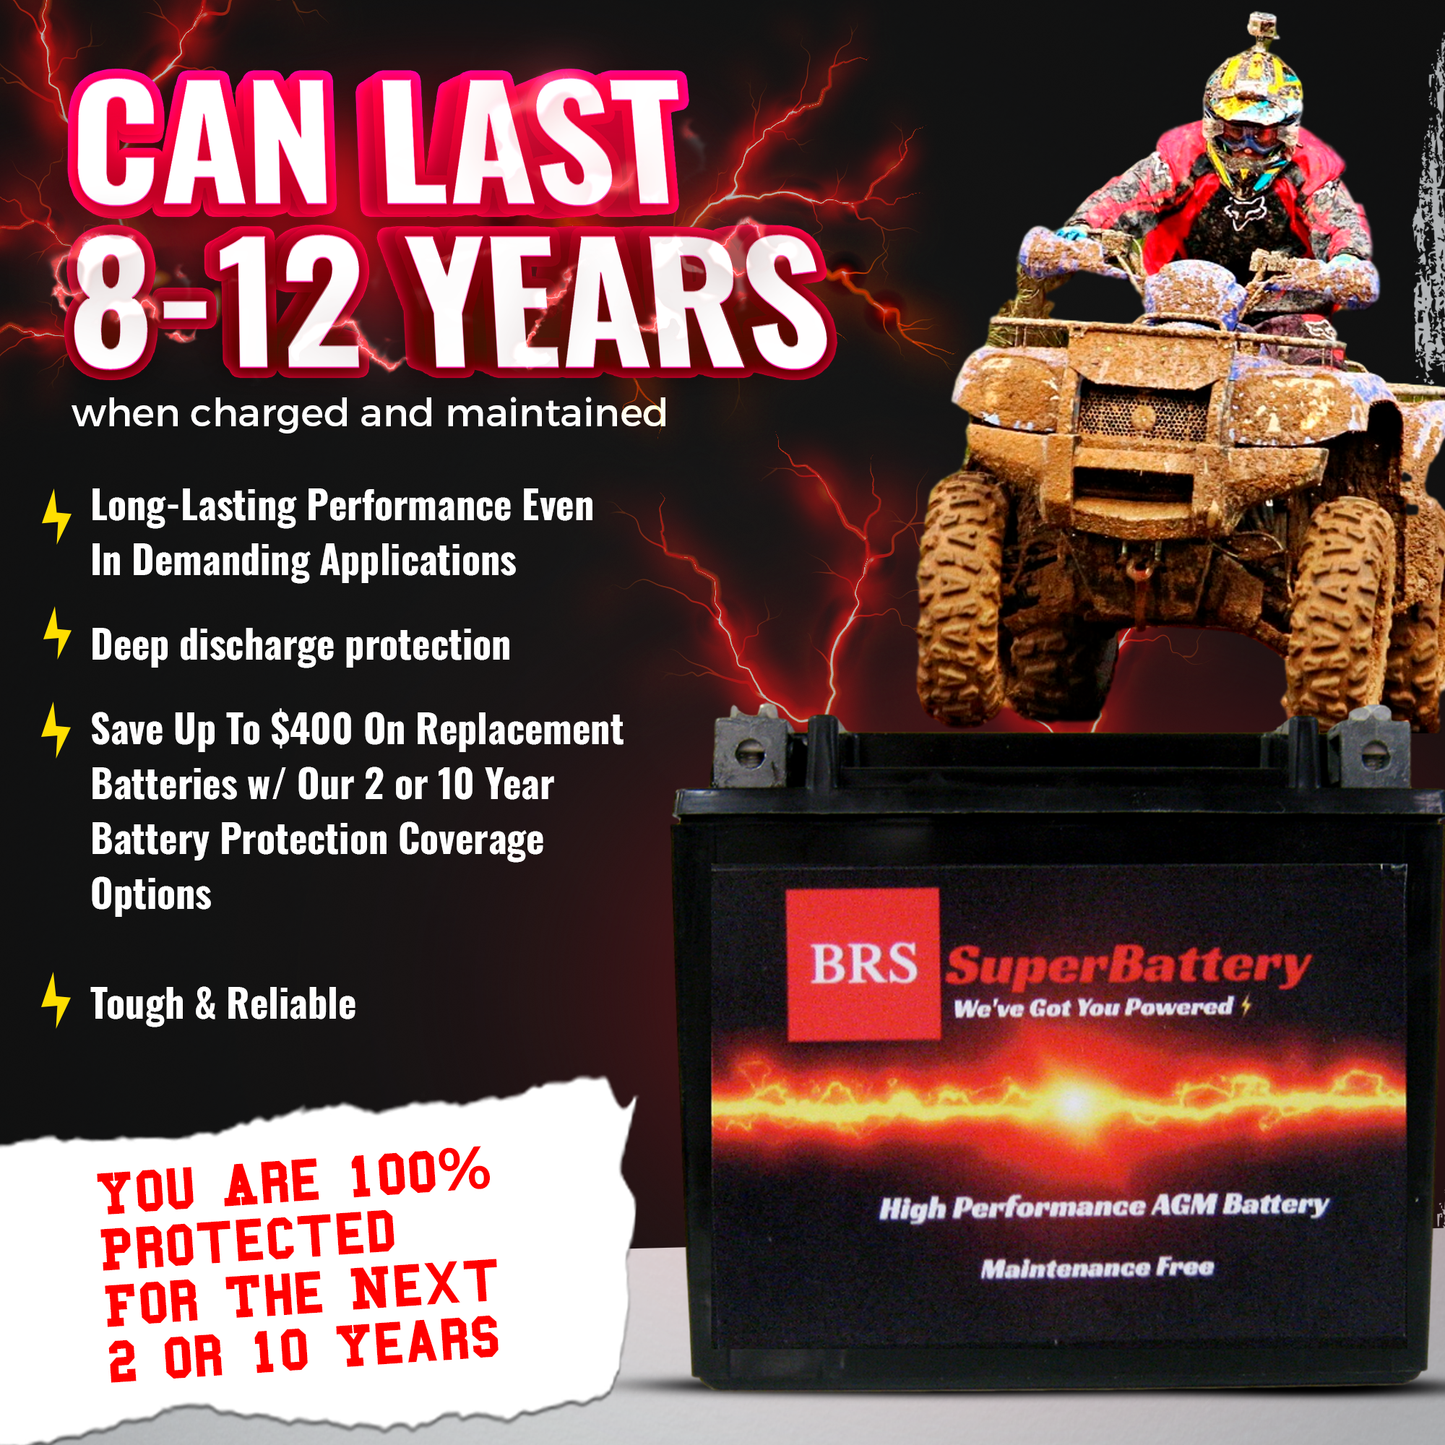 High Performance BRS5L-BS 10 Year Battery & Smart Charger / Maintainer Combo Bundle Kit 12v Sealed AGM PowerSports Battery - BRS Super Battery